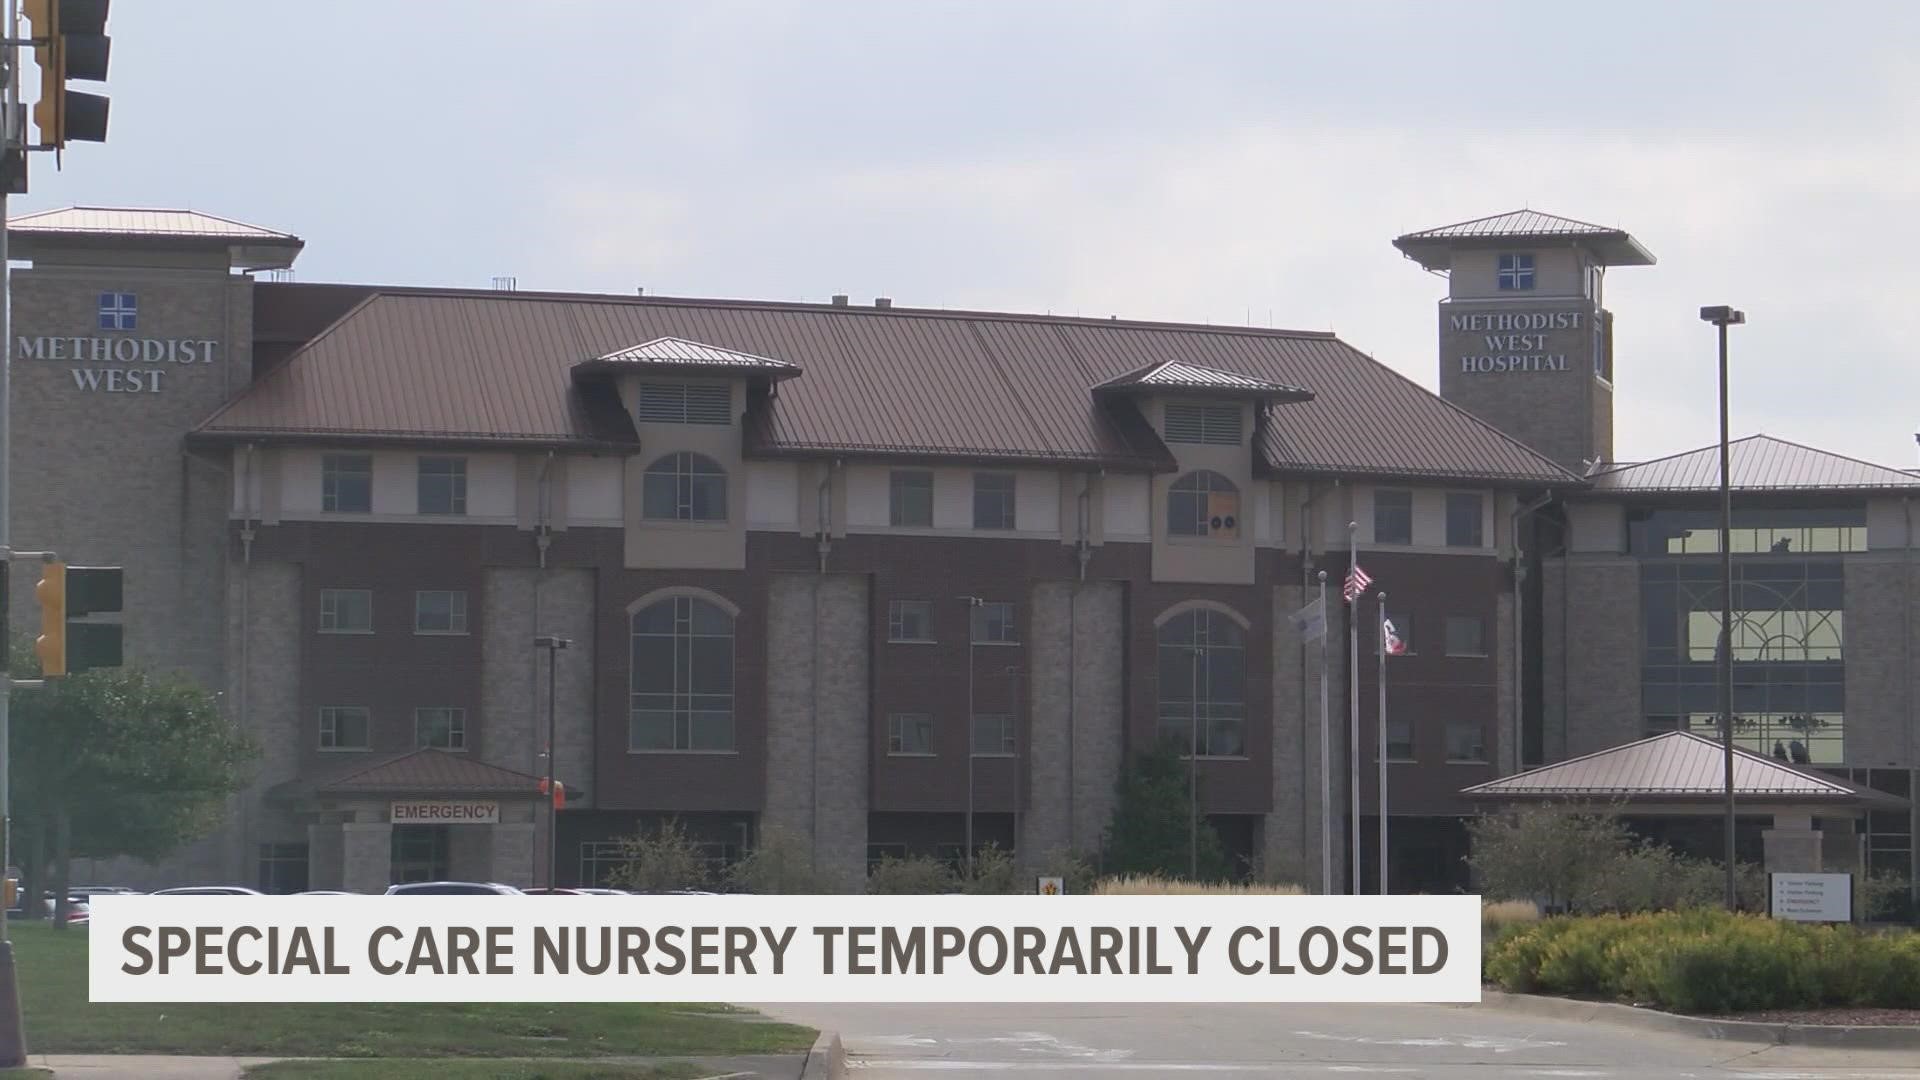 The SCN at Methodist West is temporarily closed, meaning newborns requiring the care SCN offered, would need to be moved to Iowa Methodist Medical Center.